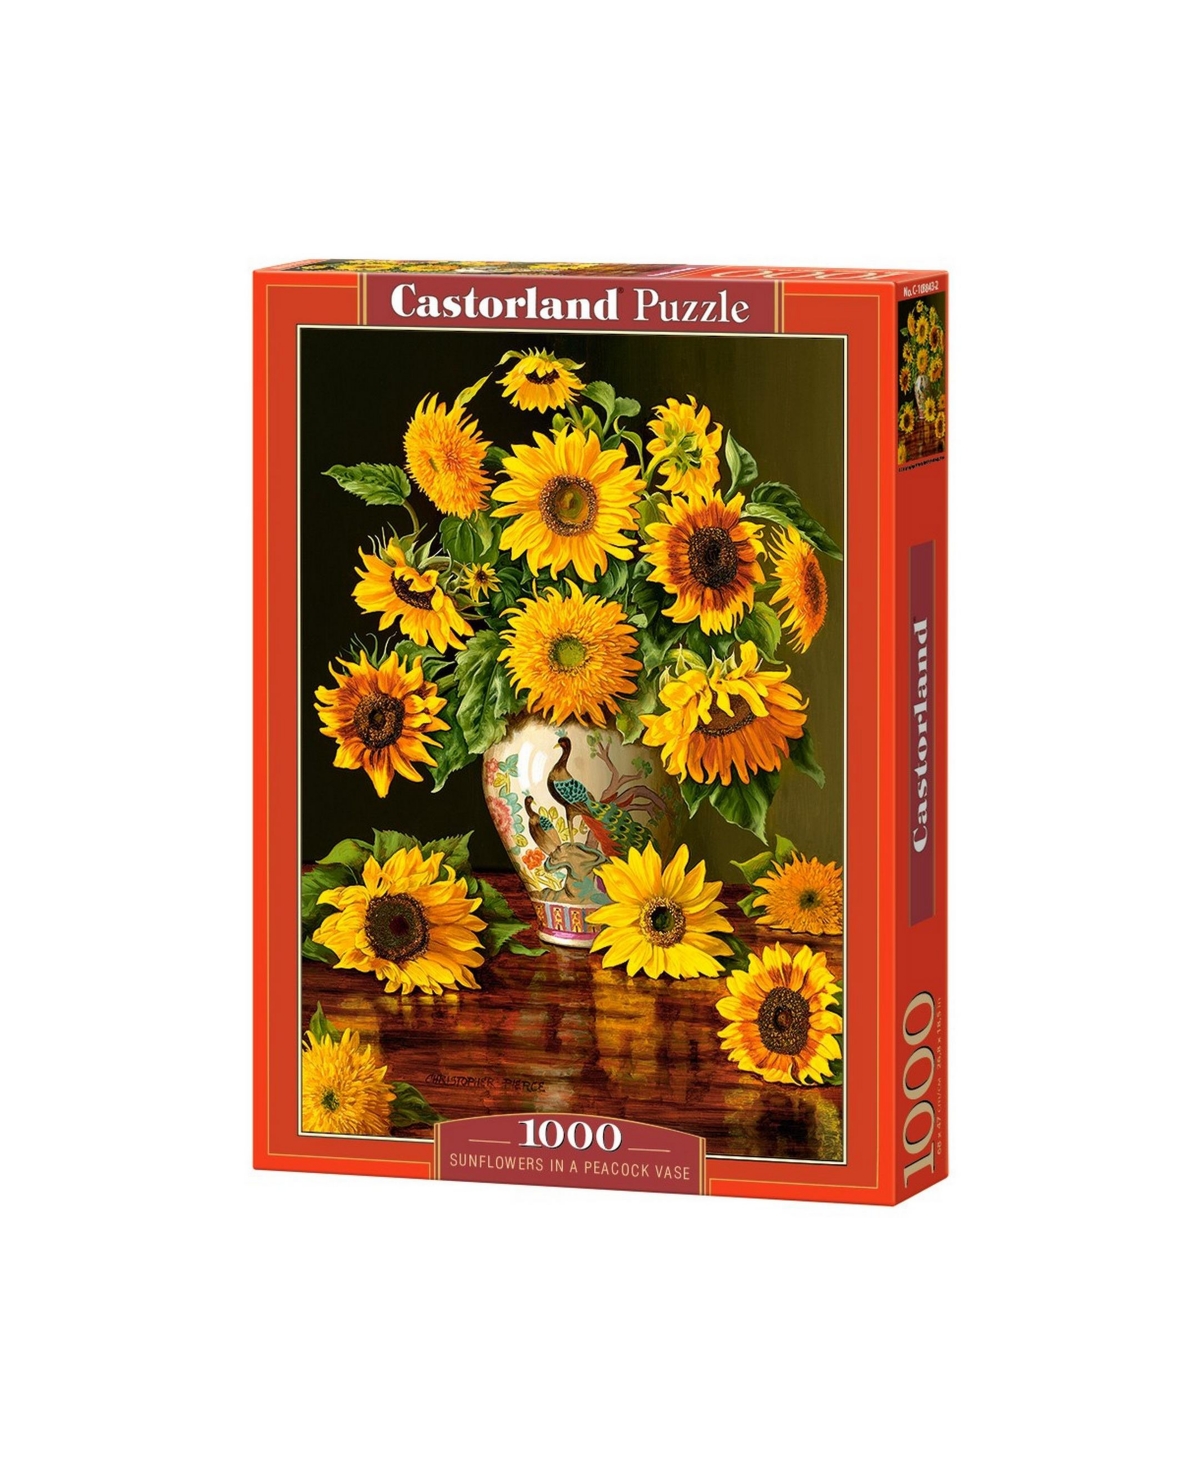 Castorland Sunflowers In A Peacock Vase Jigsaw Puzzle Set, 1000 Piece In Multicolor